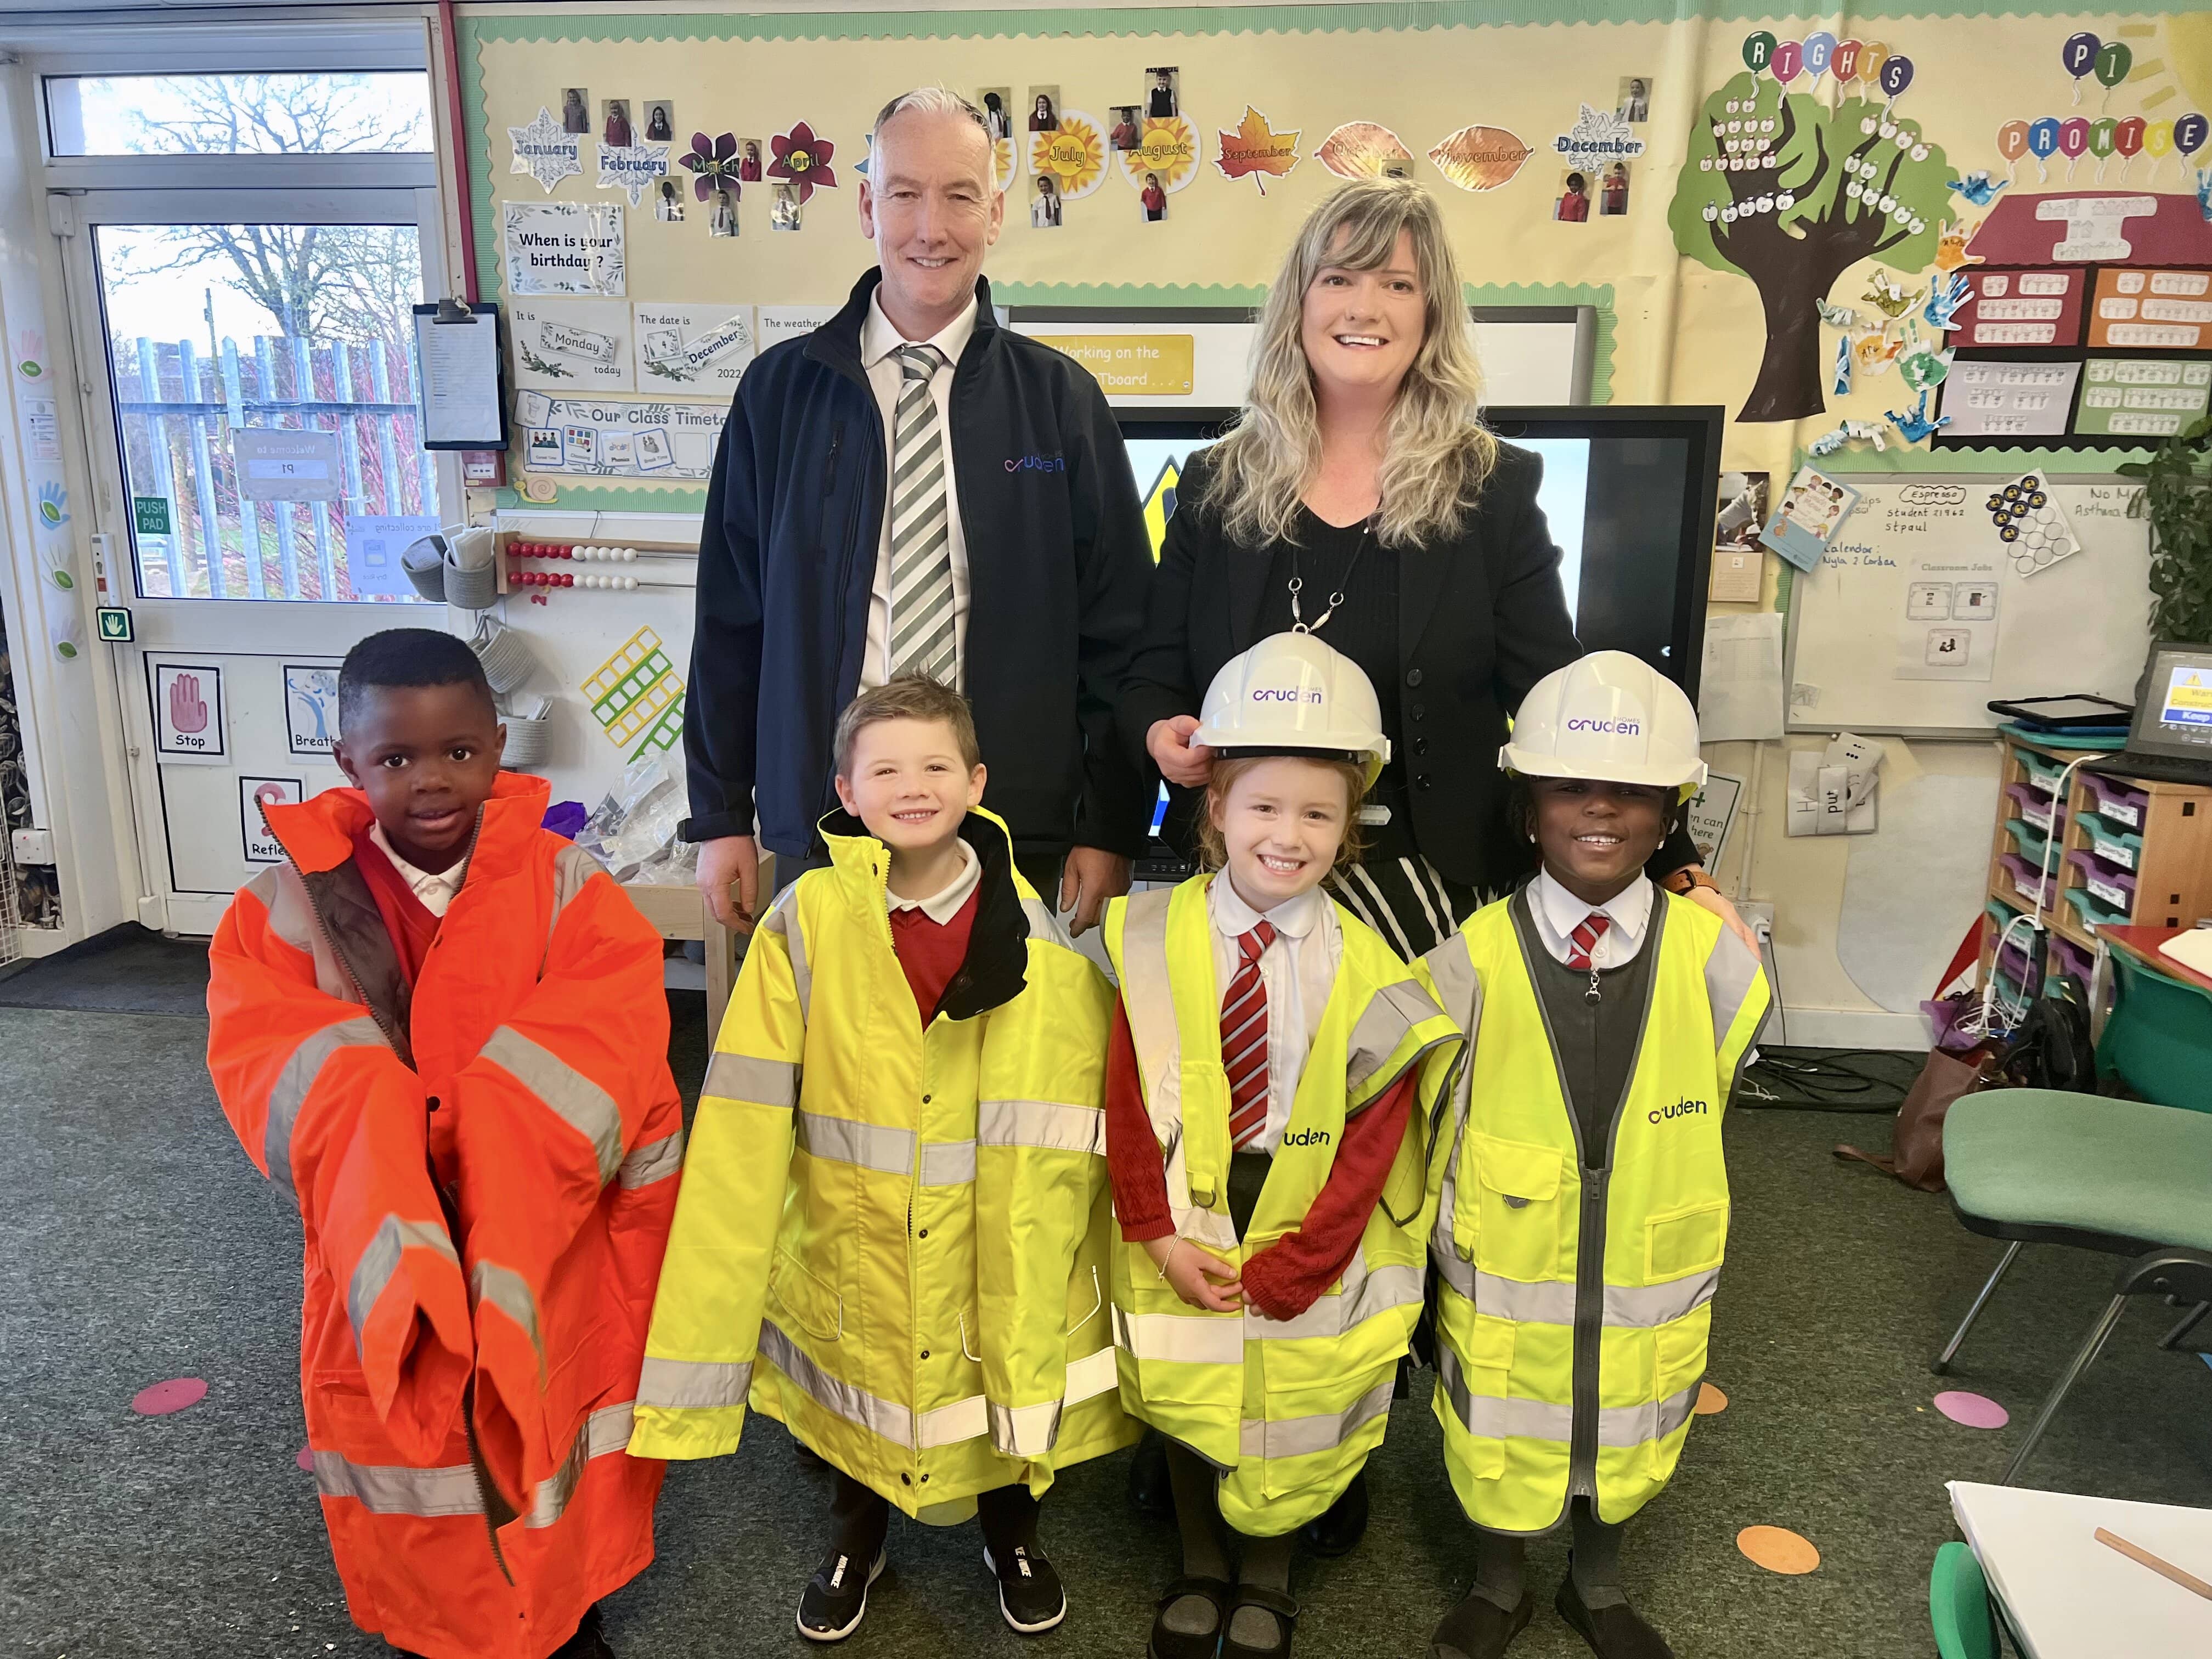 Cruden Homes visit to St Paul's RC Primary School